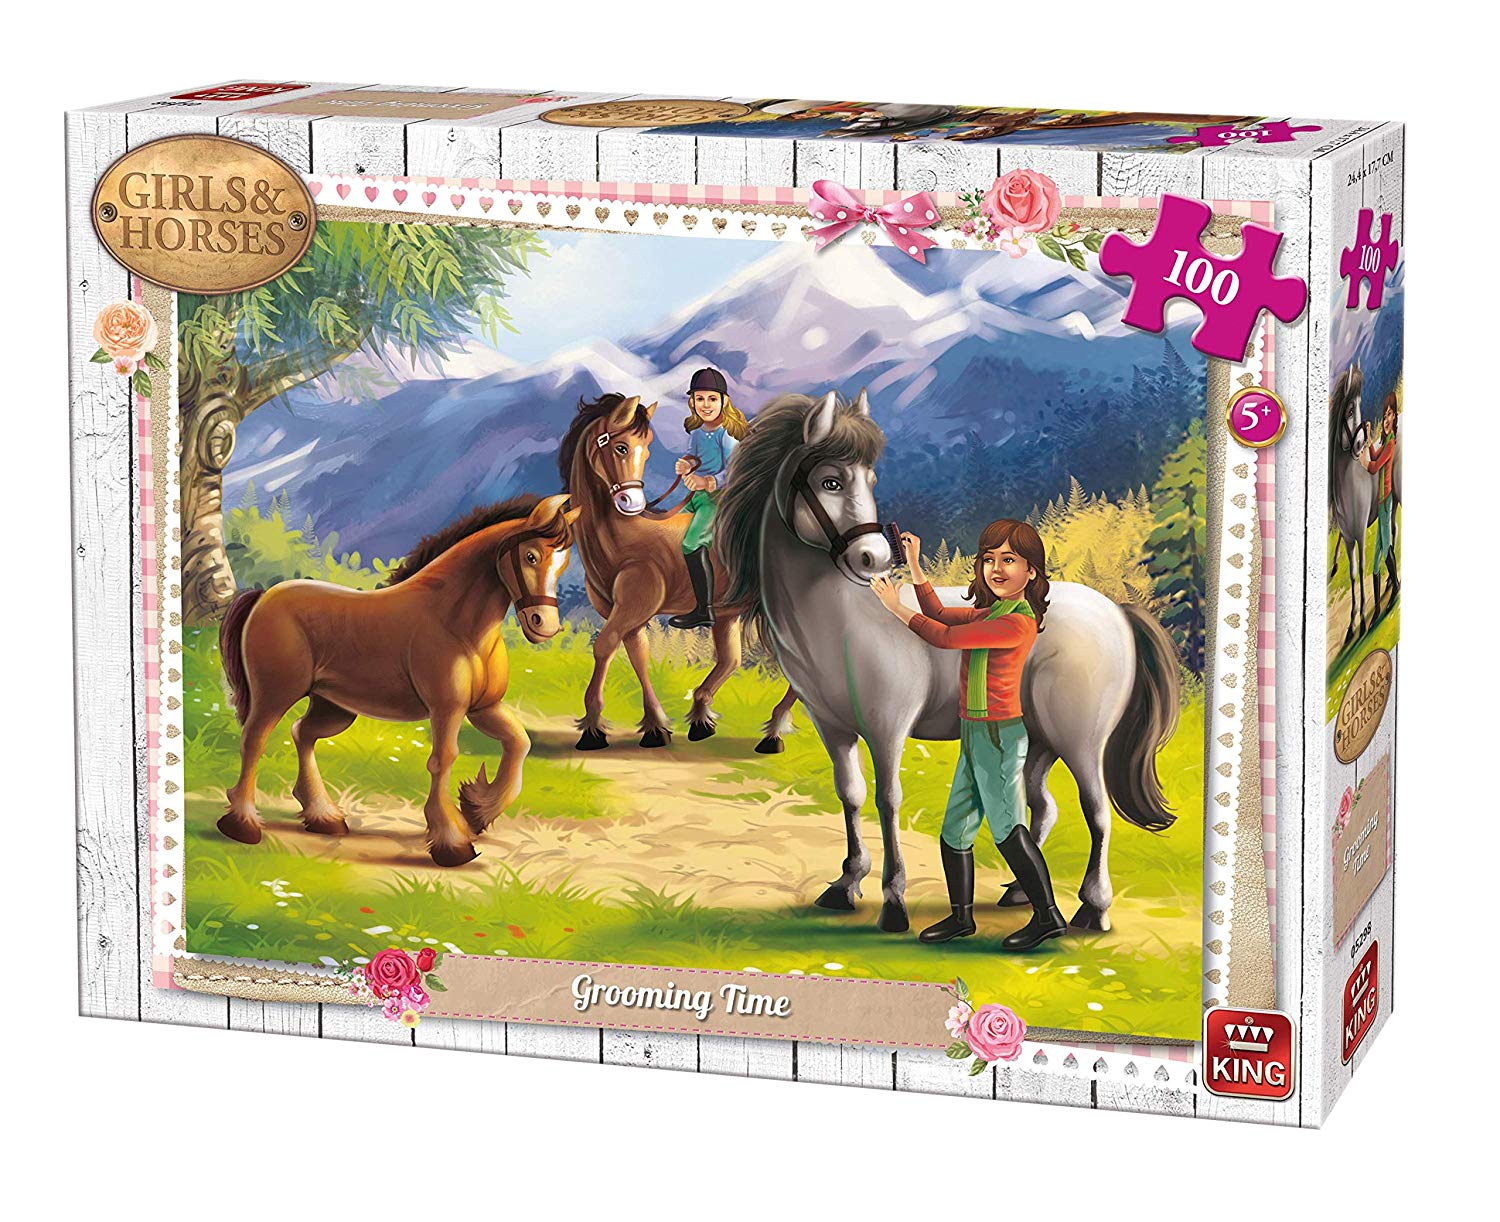 King Kng05298 Girl And Horse Grooming Time Puzzle 100